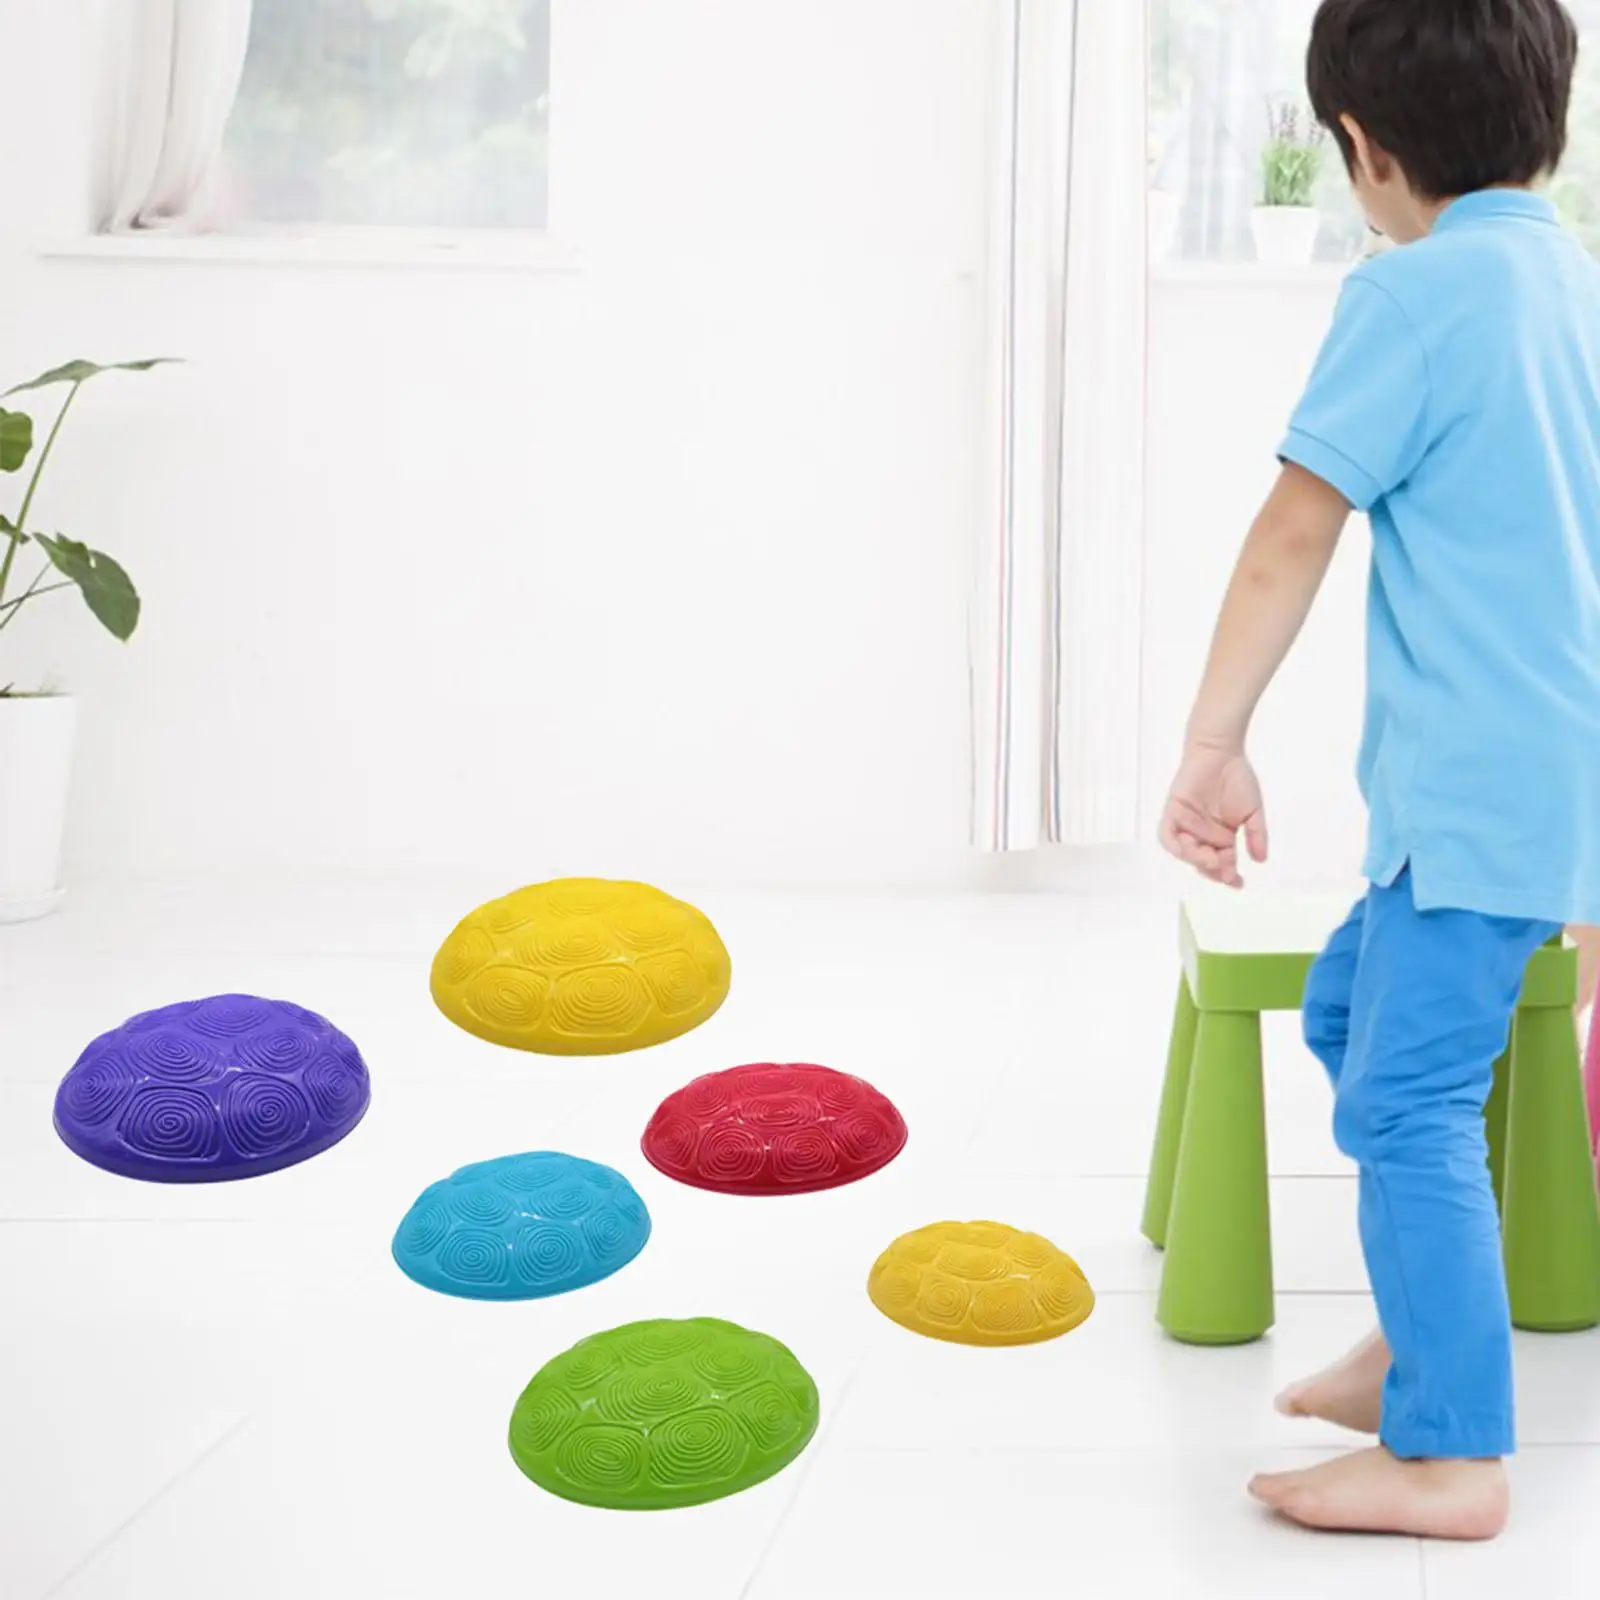 6x Balance Stepping stone Gross Motor Development Turtle Jumping crossing River stone Coordination for kids